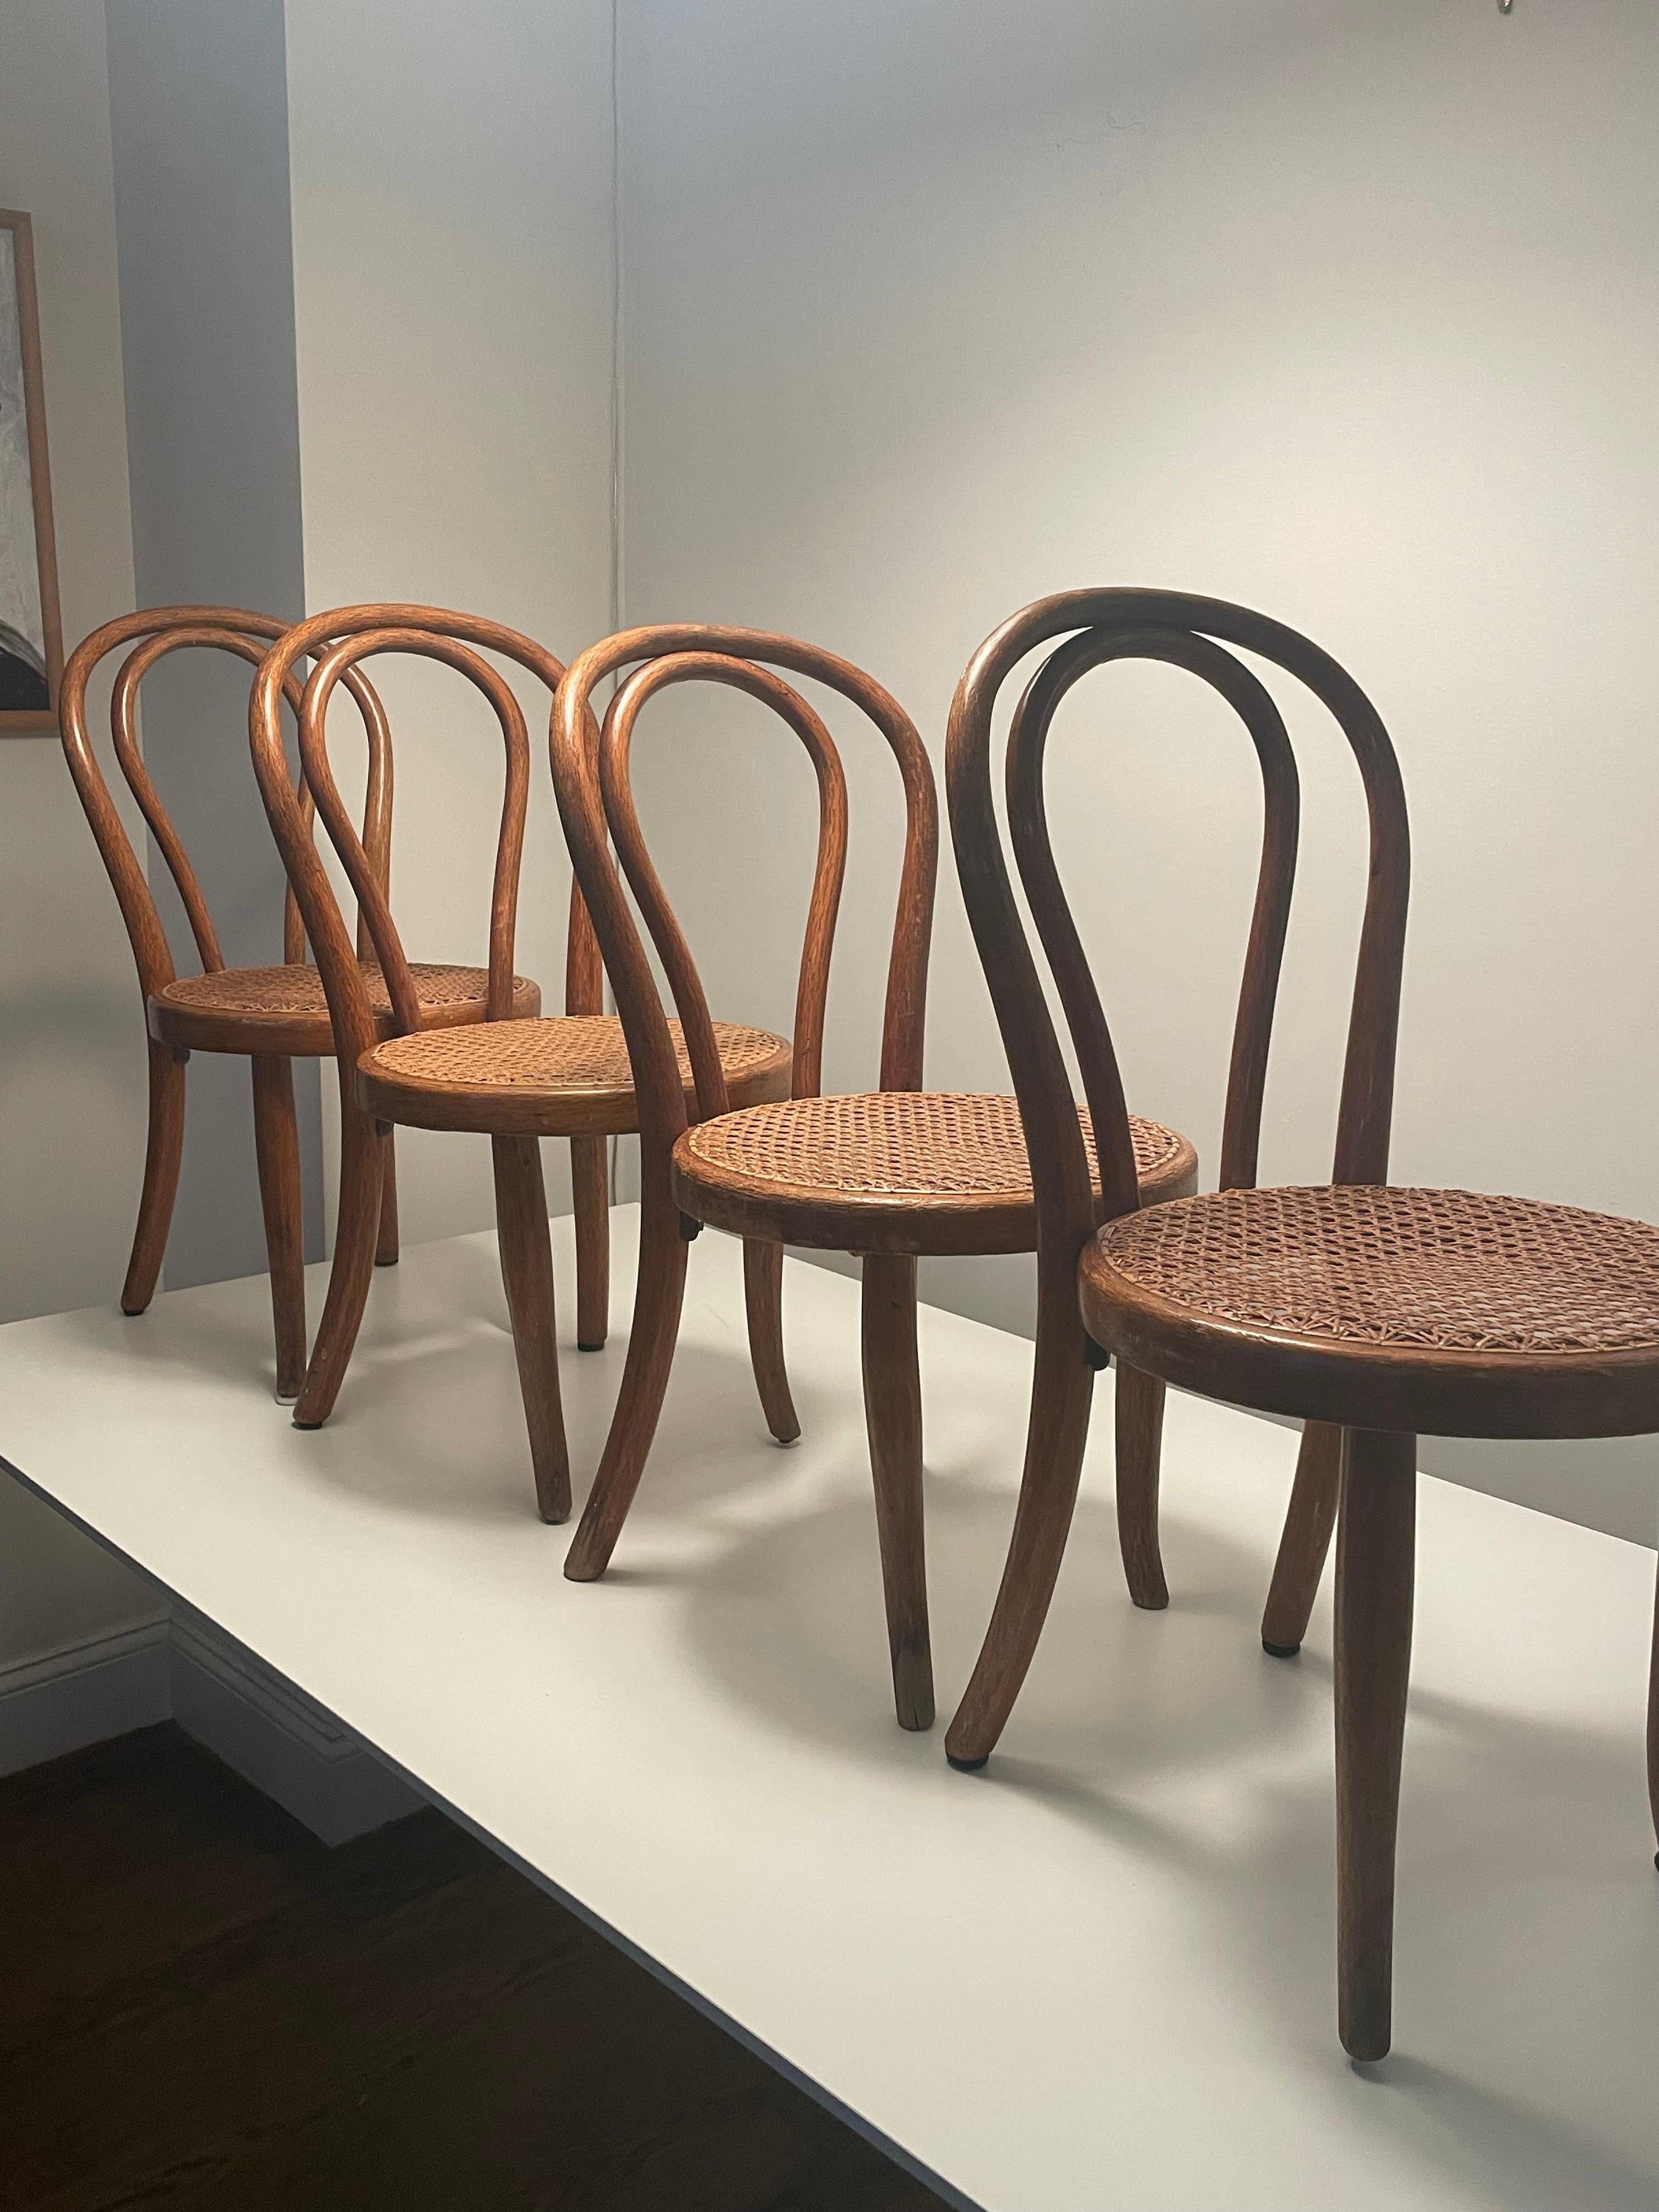 Set of Four Thonet Bentwood and Cane Children’s Chairs In Good Condition For Sale In New York, NY